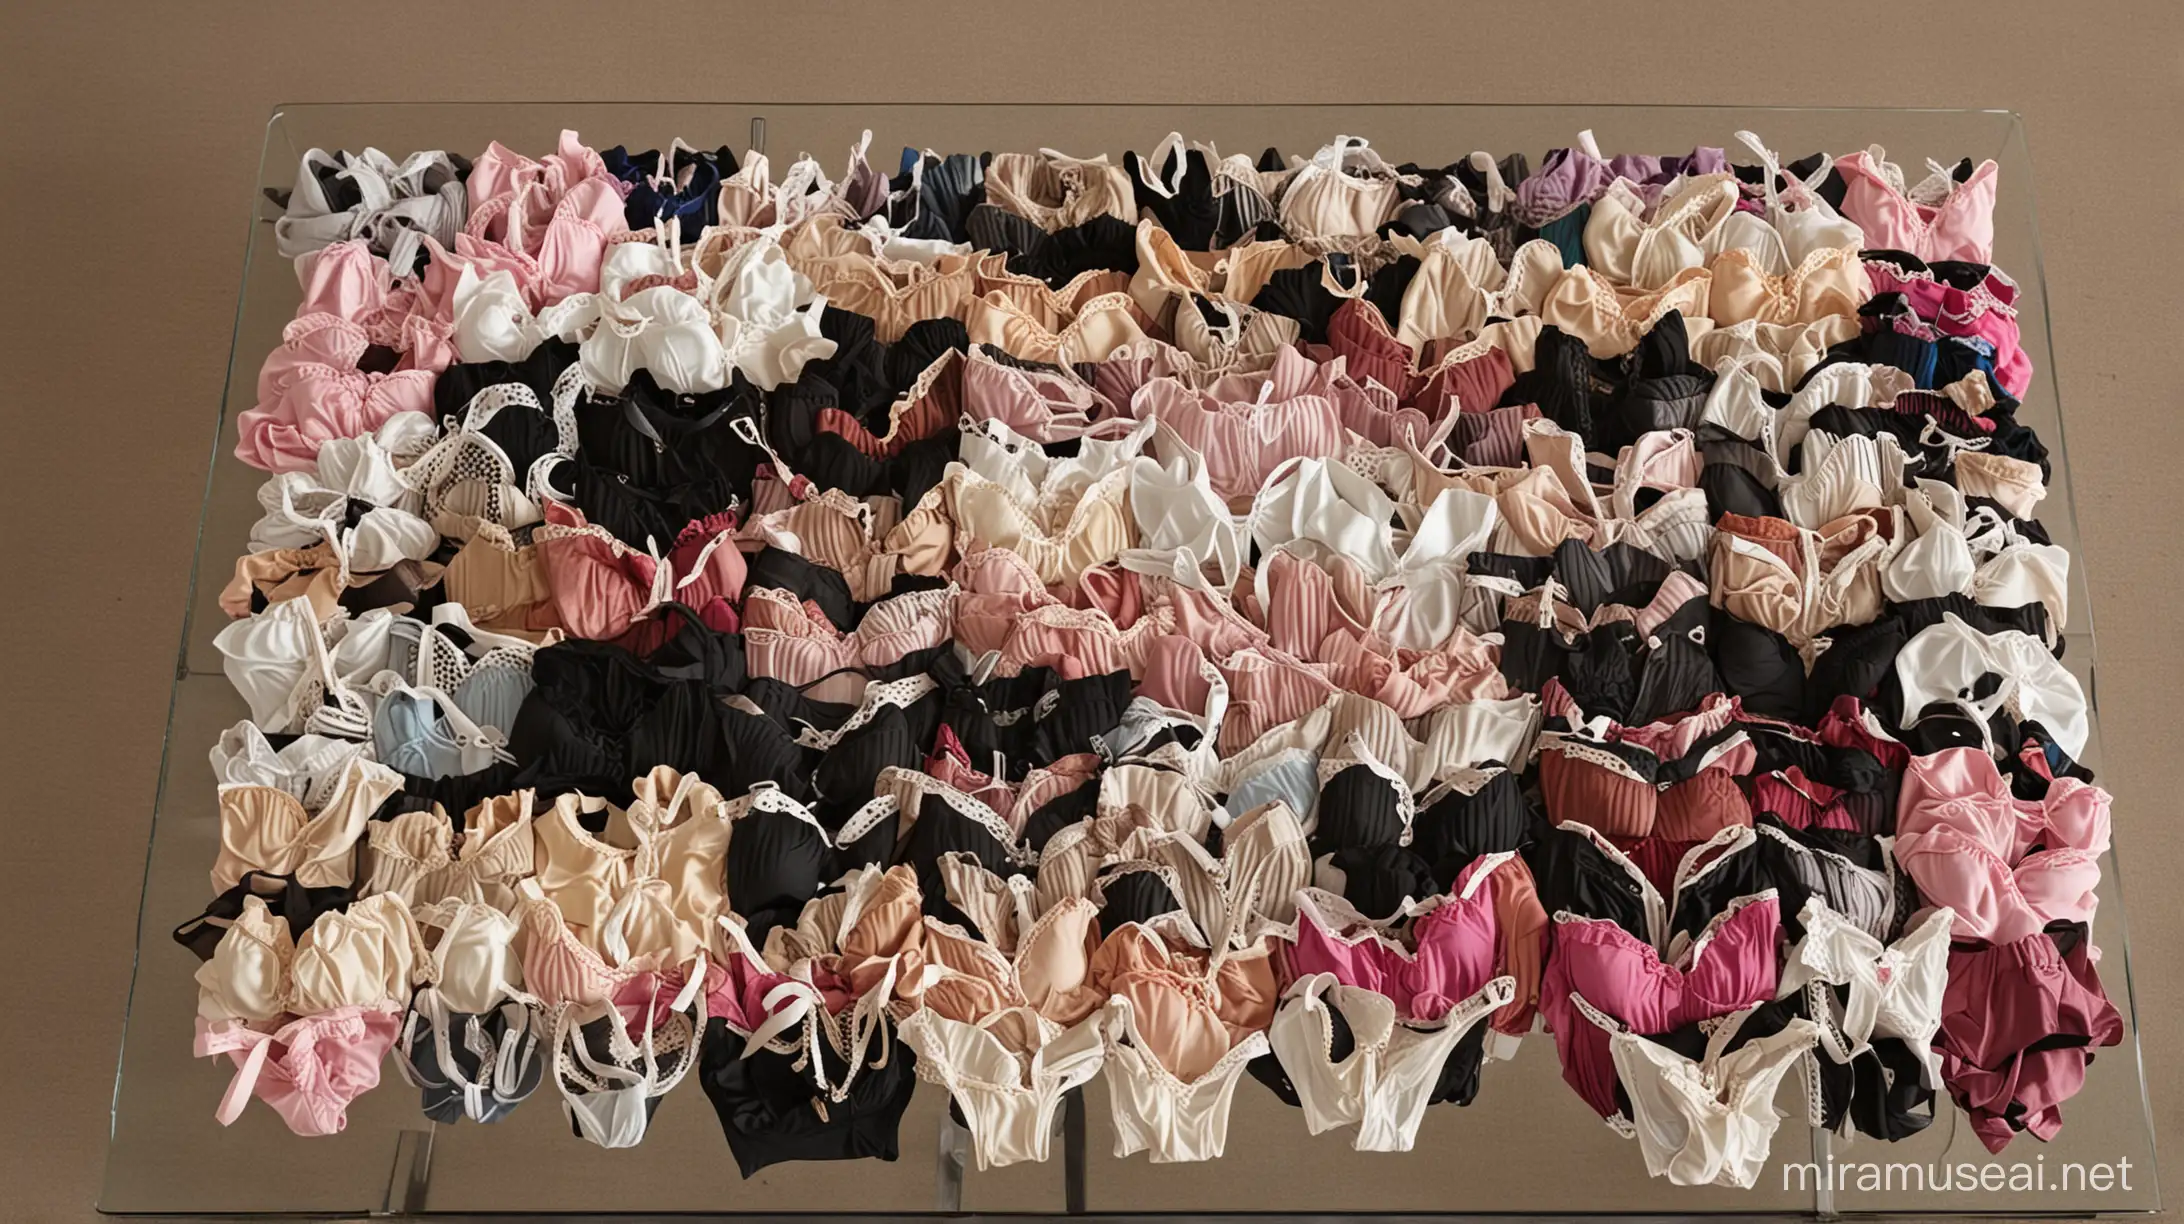 Assorted Lingerie on Display Colorful Bras Panties and Tights